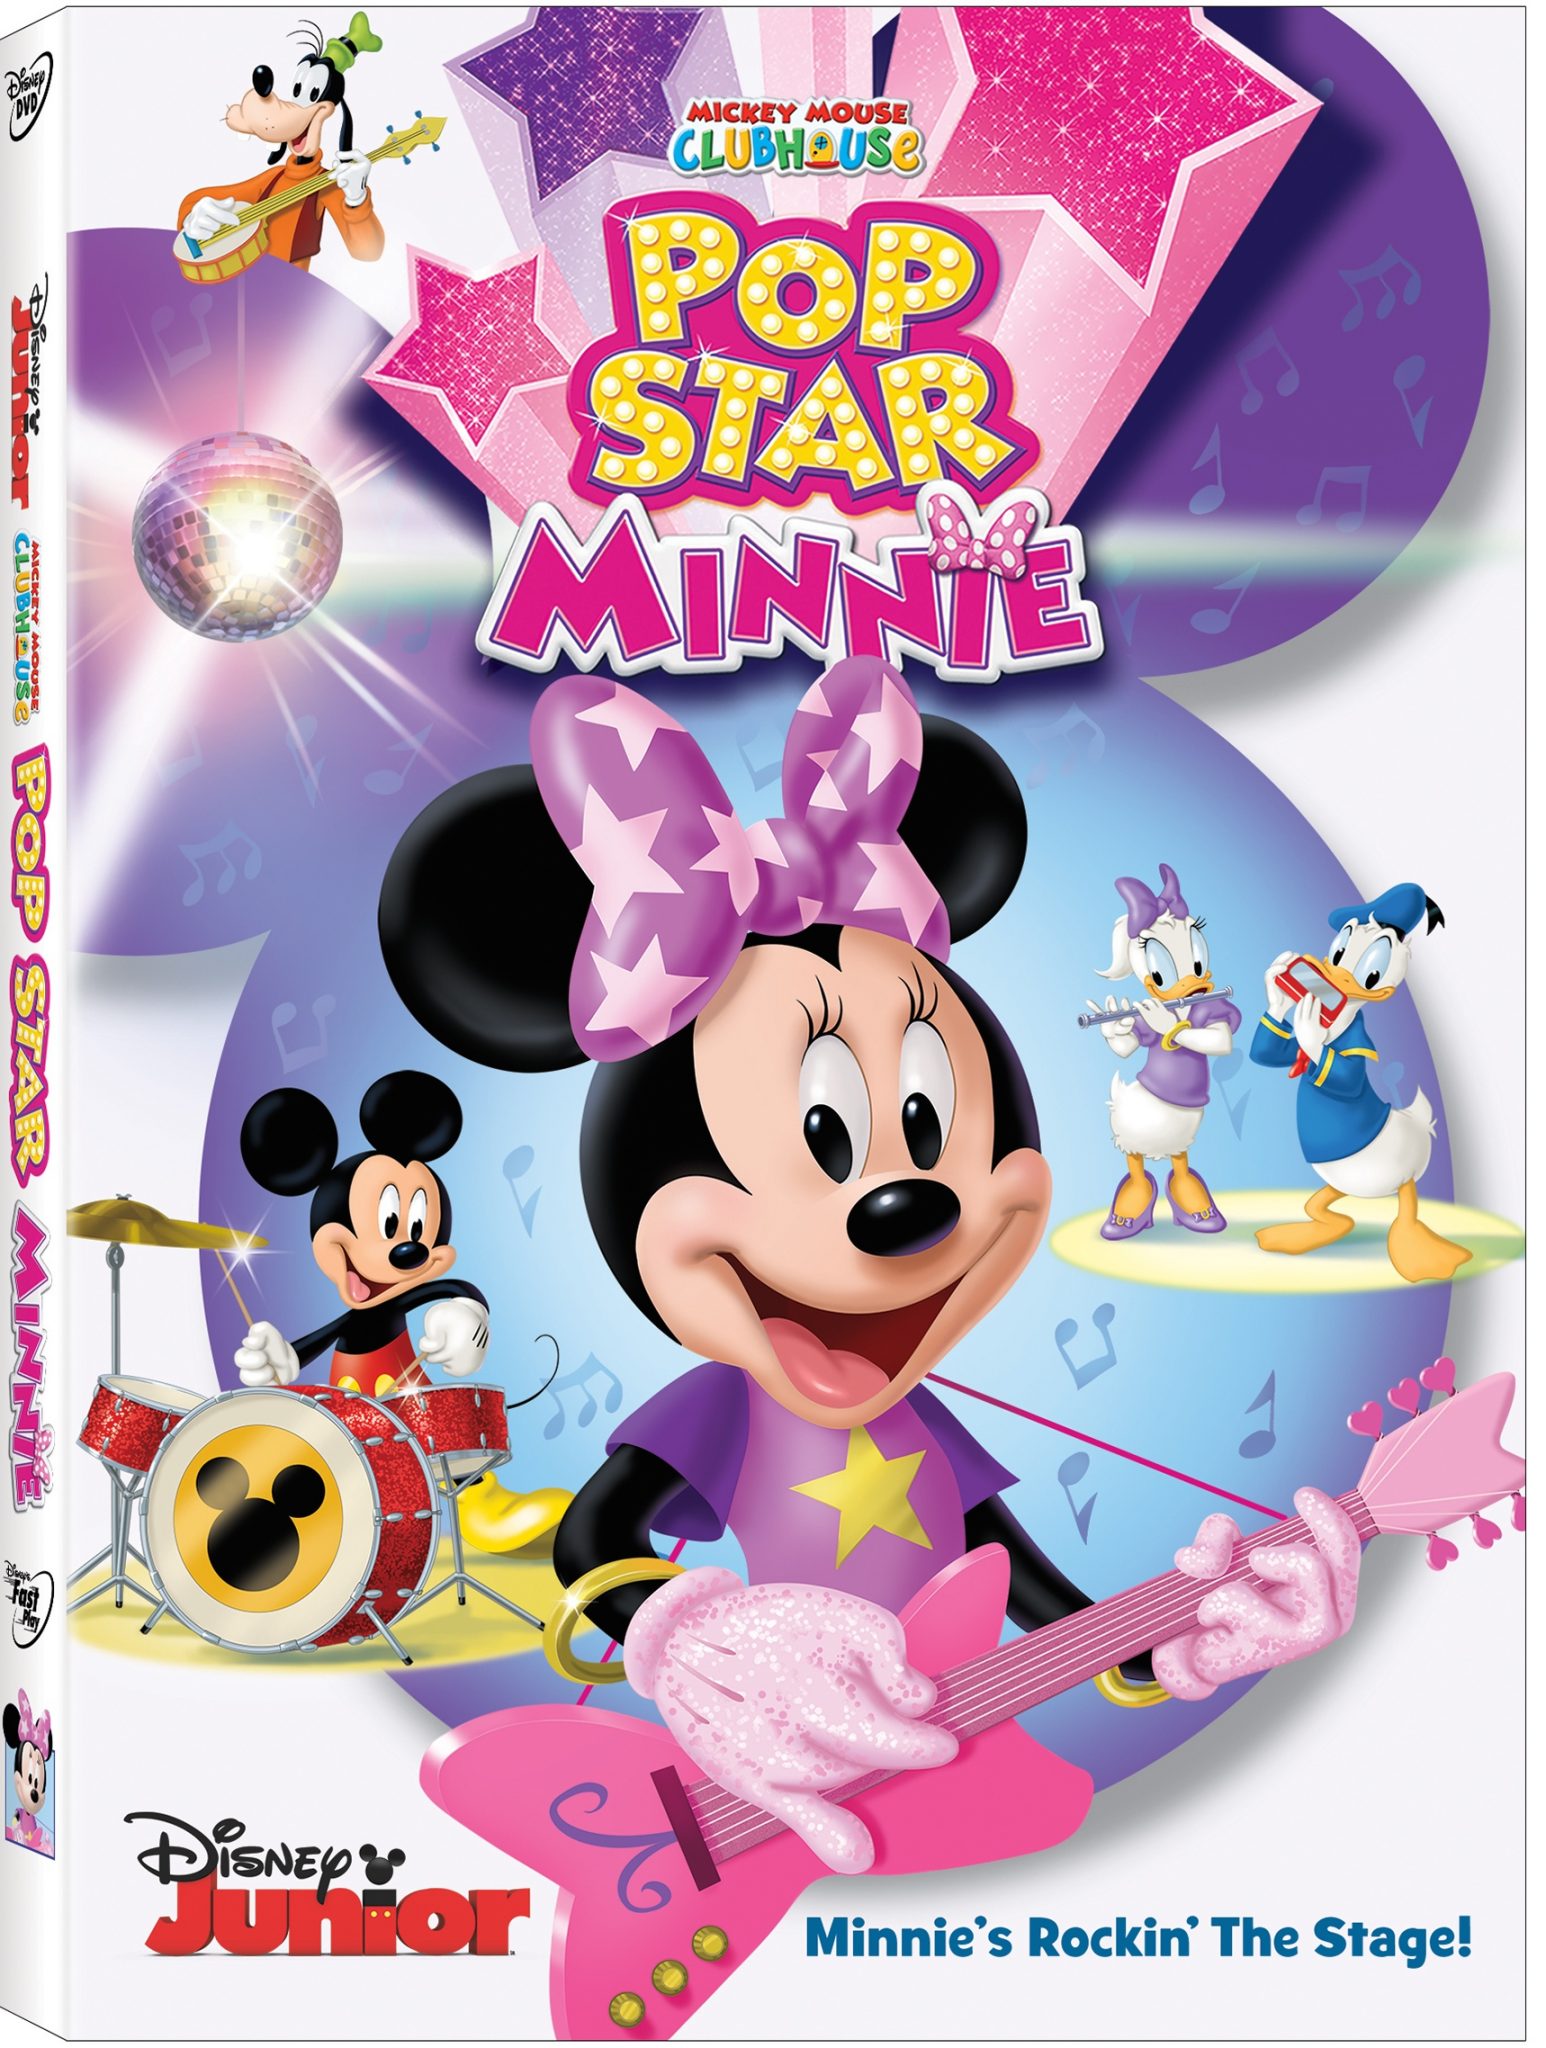 Minnie Mouse Rocks the Stage in ‘Mickey Mouse Clubhouse: Pop Star Minnie’ Heading to DVD 2/2